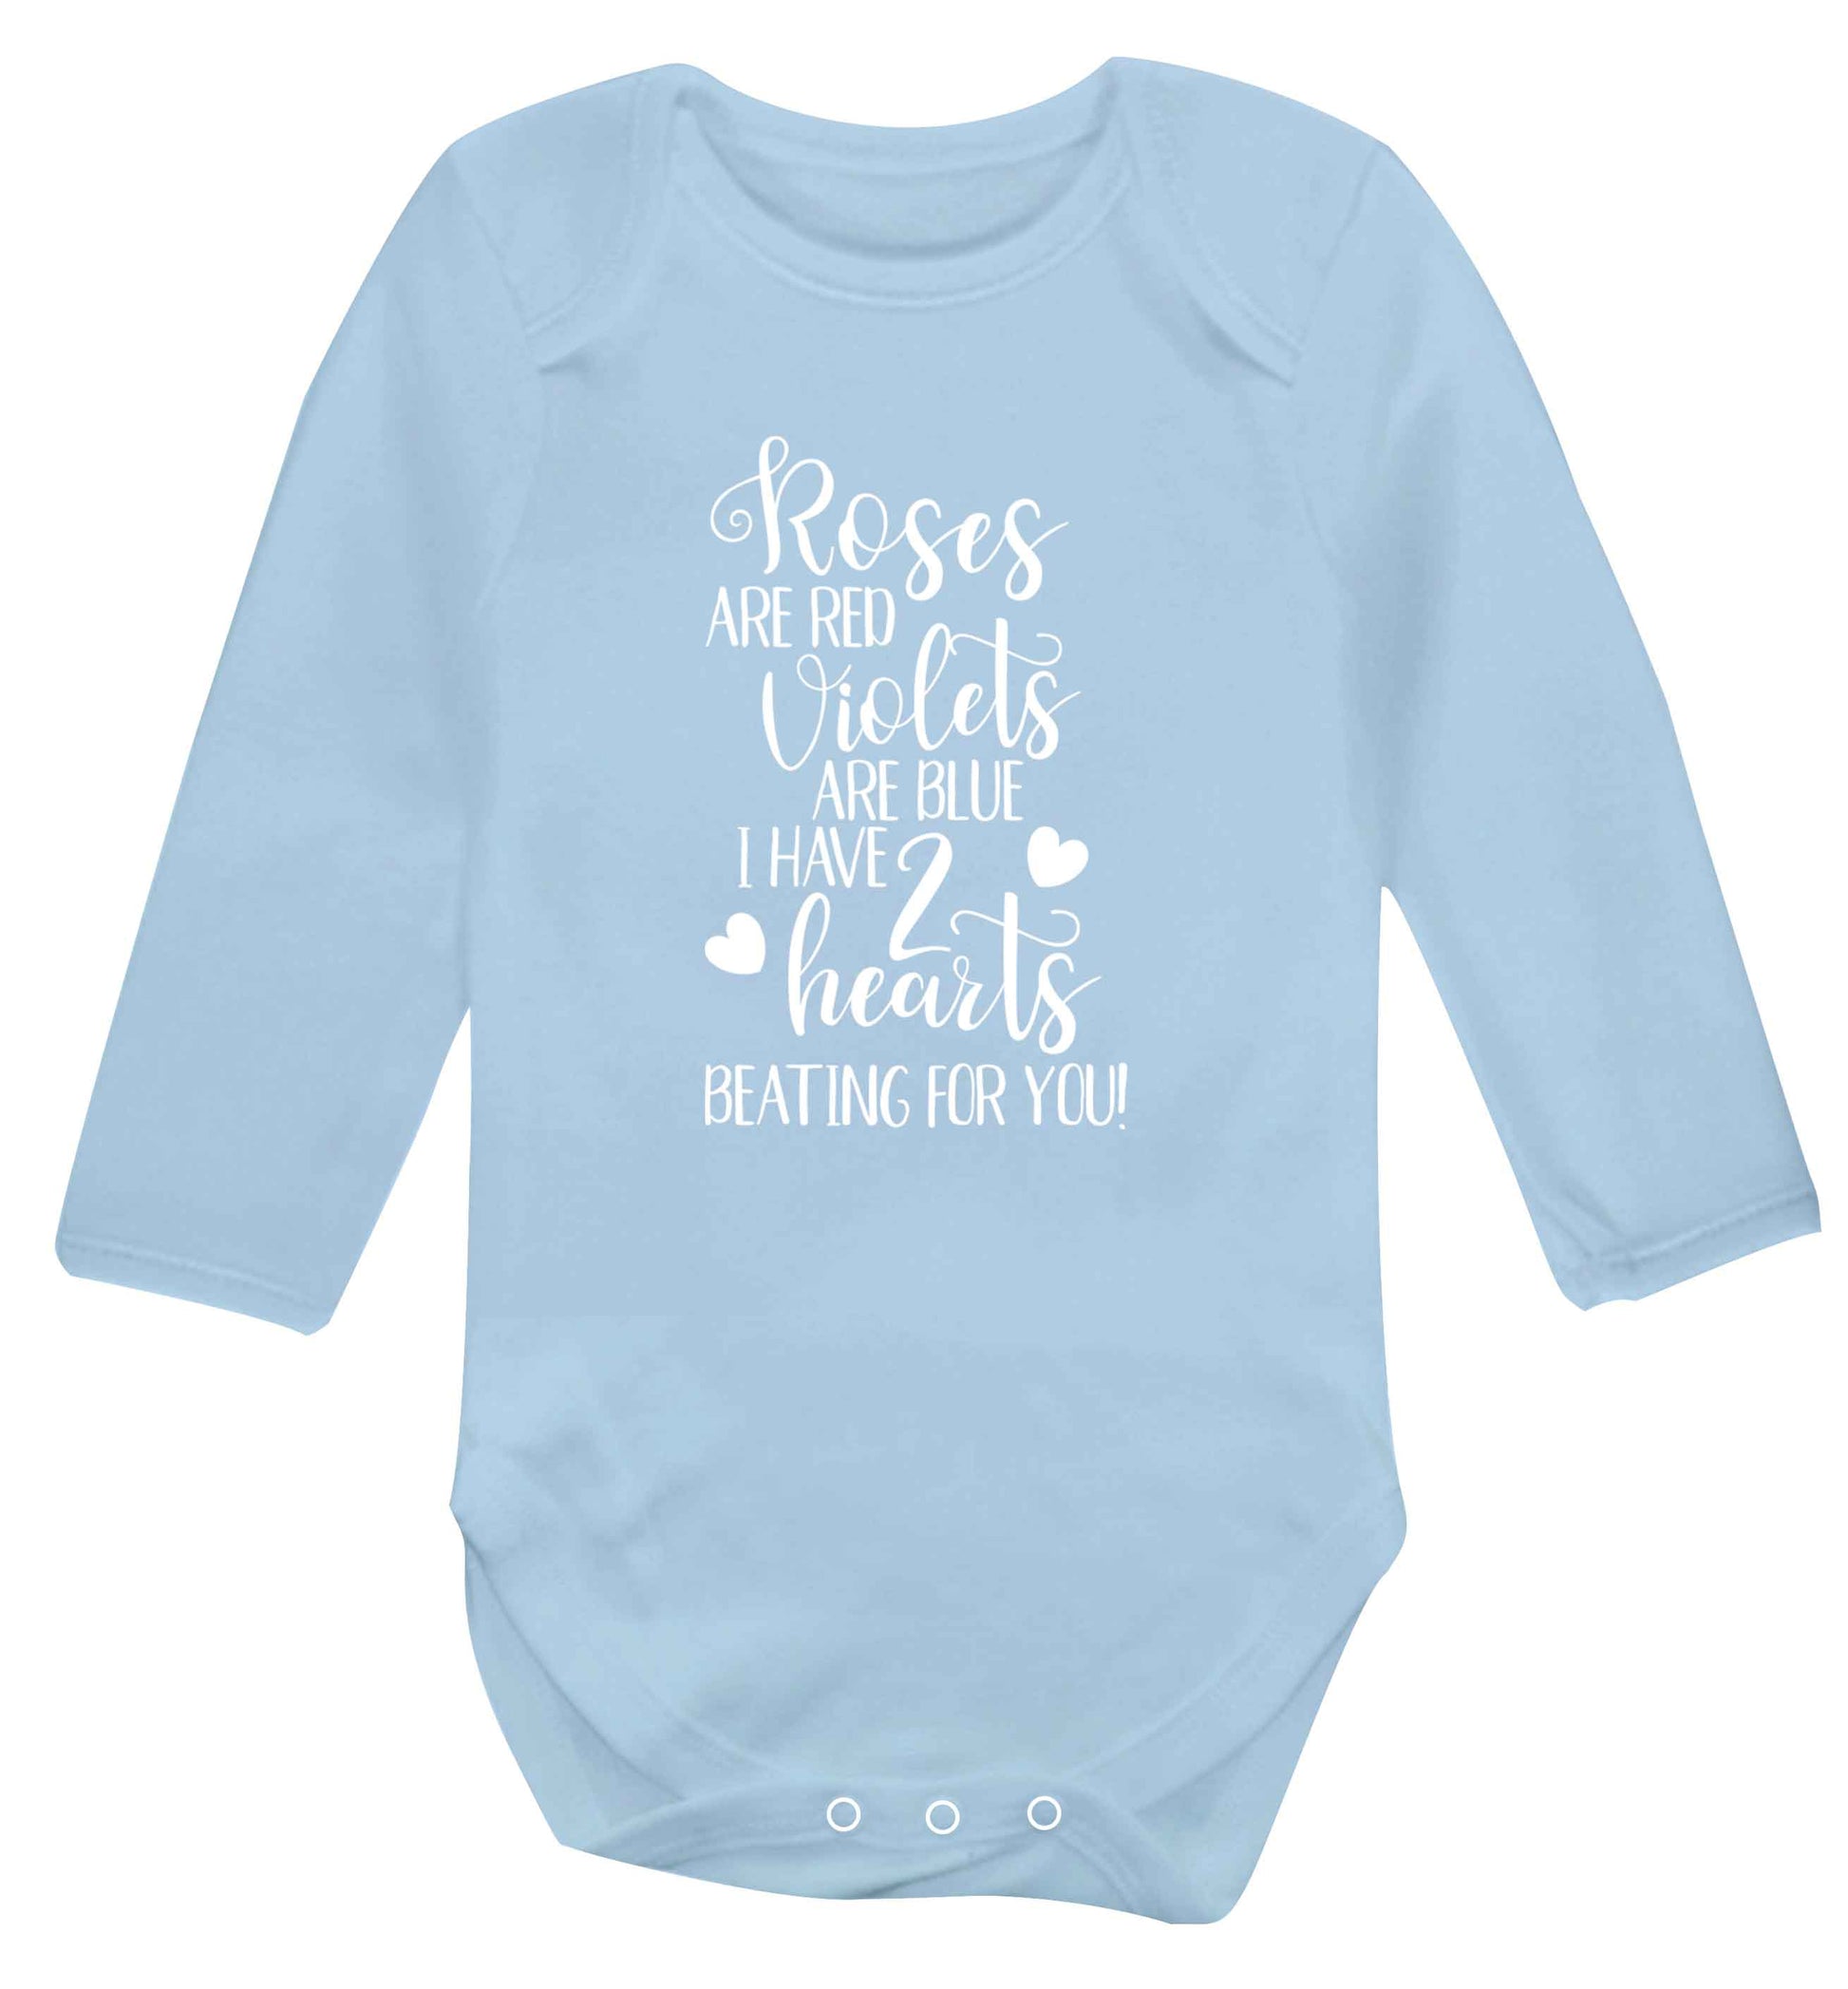 Roses are red violets are blue I have two hearts beating for you Baby Vest long sleeved pale blue 6-12 months